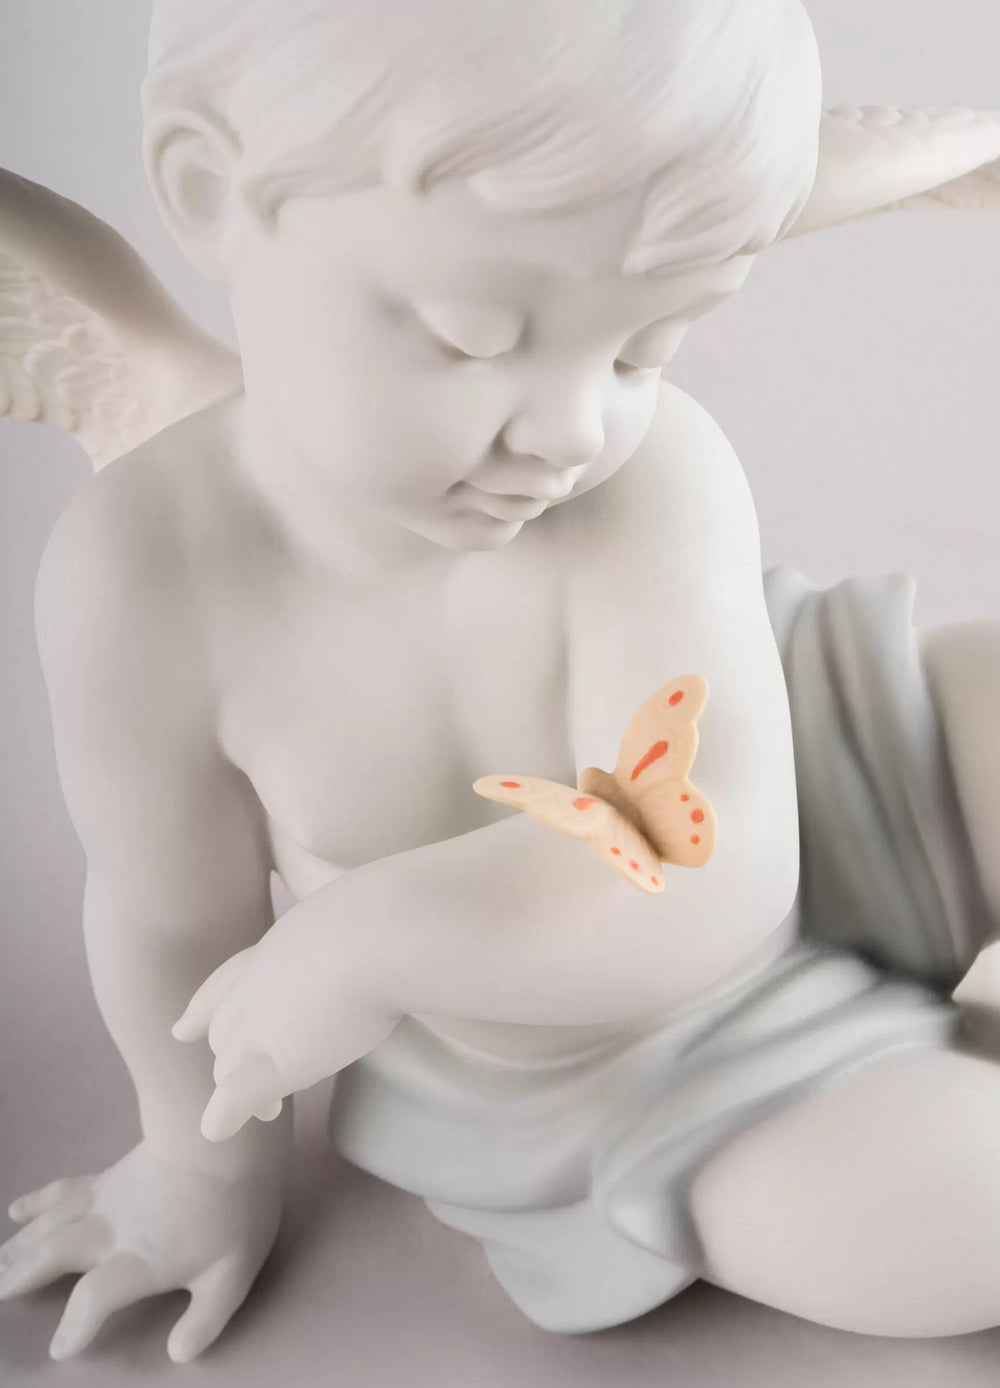 LLADRO® - 'Angelical moments - Engelhafte Momente - 20 x 26 x 18 cm' 01009568-010-09568